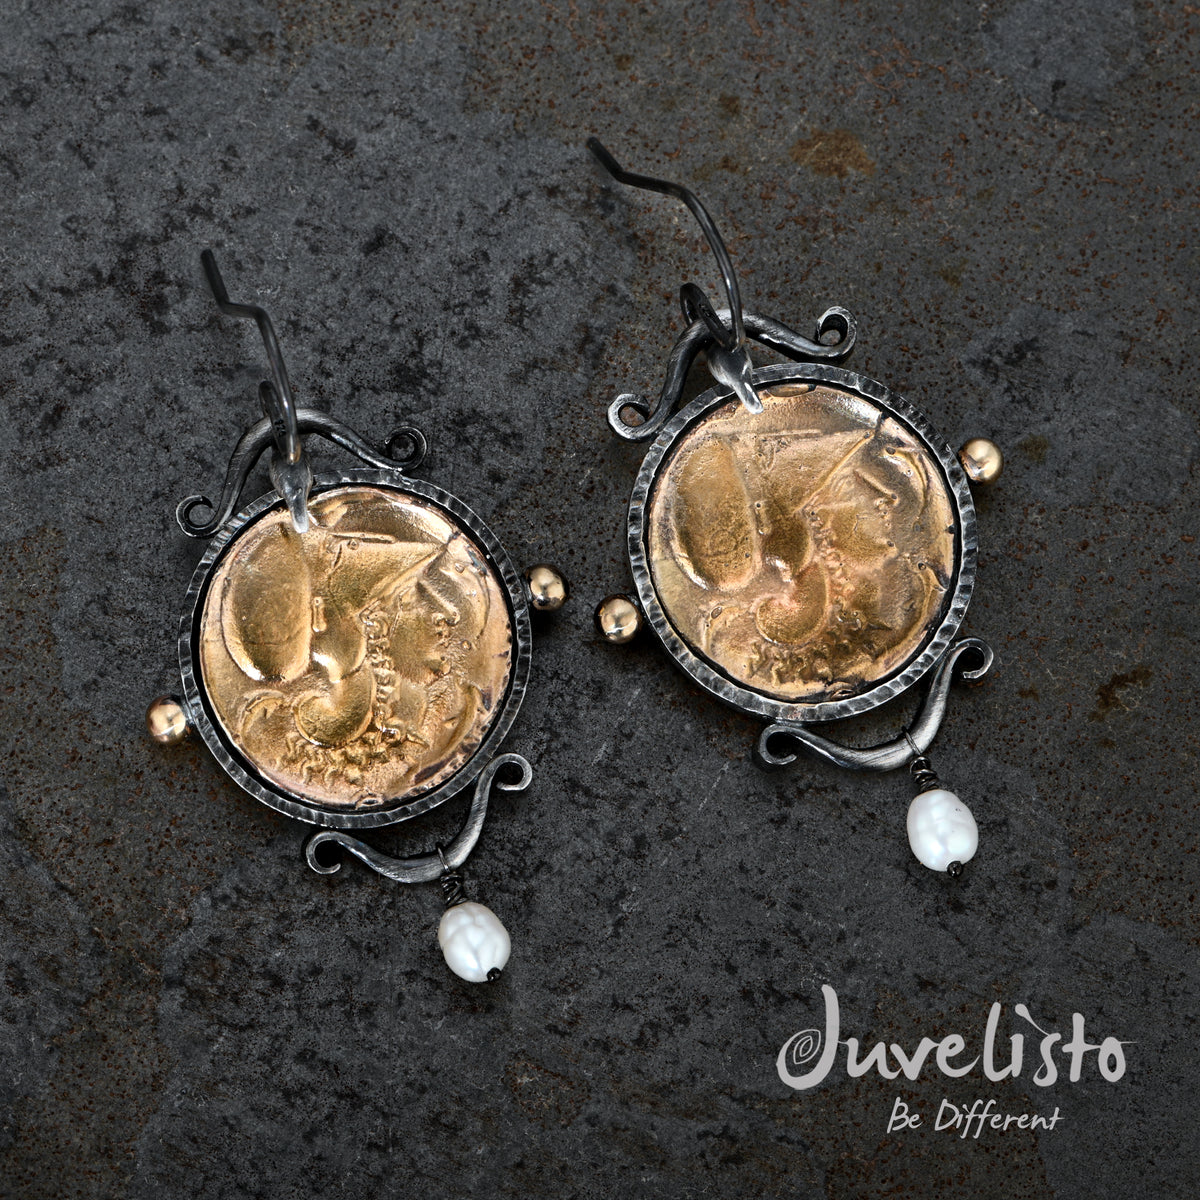 These exquisite ornate bird-like shepherd hooks earrings embody a timeless charm, showcasing sterling silver and bronze replicas of ancient Roman coins. 